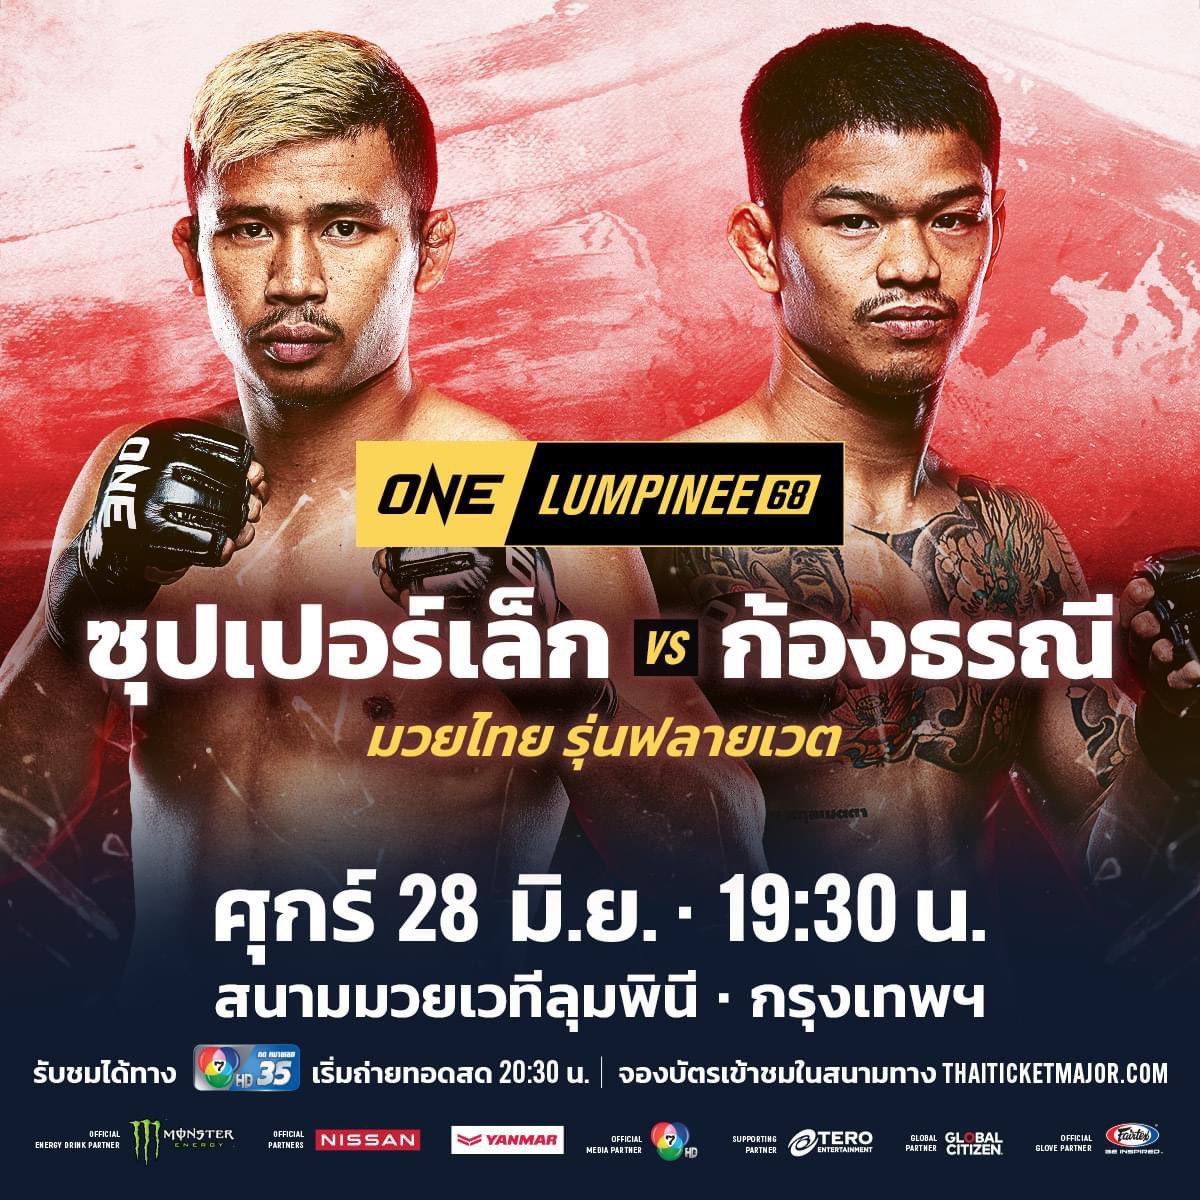 Superlek fighting another of Rodtang’s potential contenders 😂

Superlek VS Kongtoranee, Muay Thai non-title fight 135 lbs. June 28.

Bad news is that this leaves Superlek with less time to bulk up to fight Haggerty.

Also, another champ that got double booked🤷
#ONEChampionship